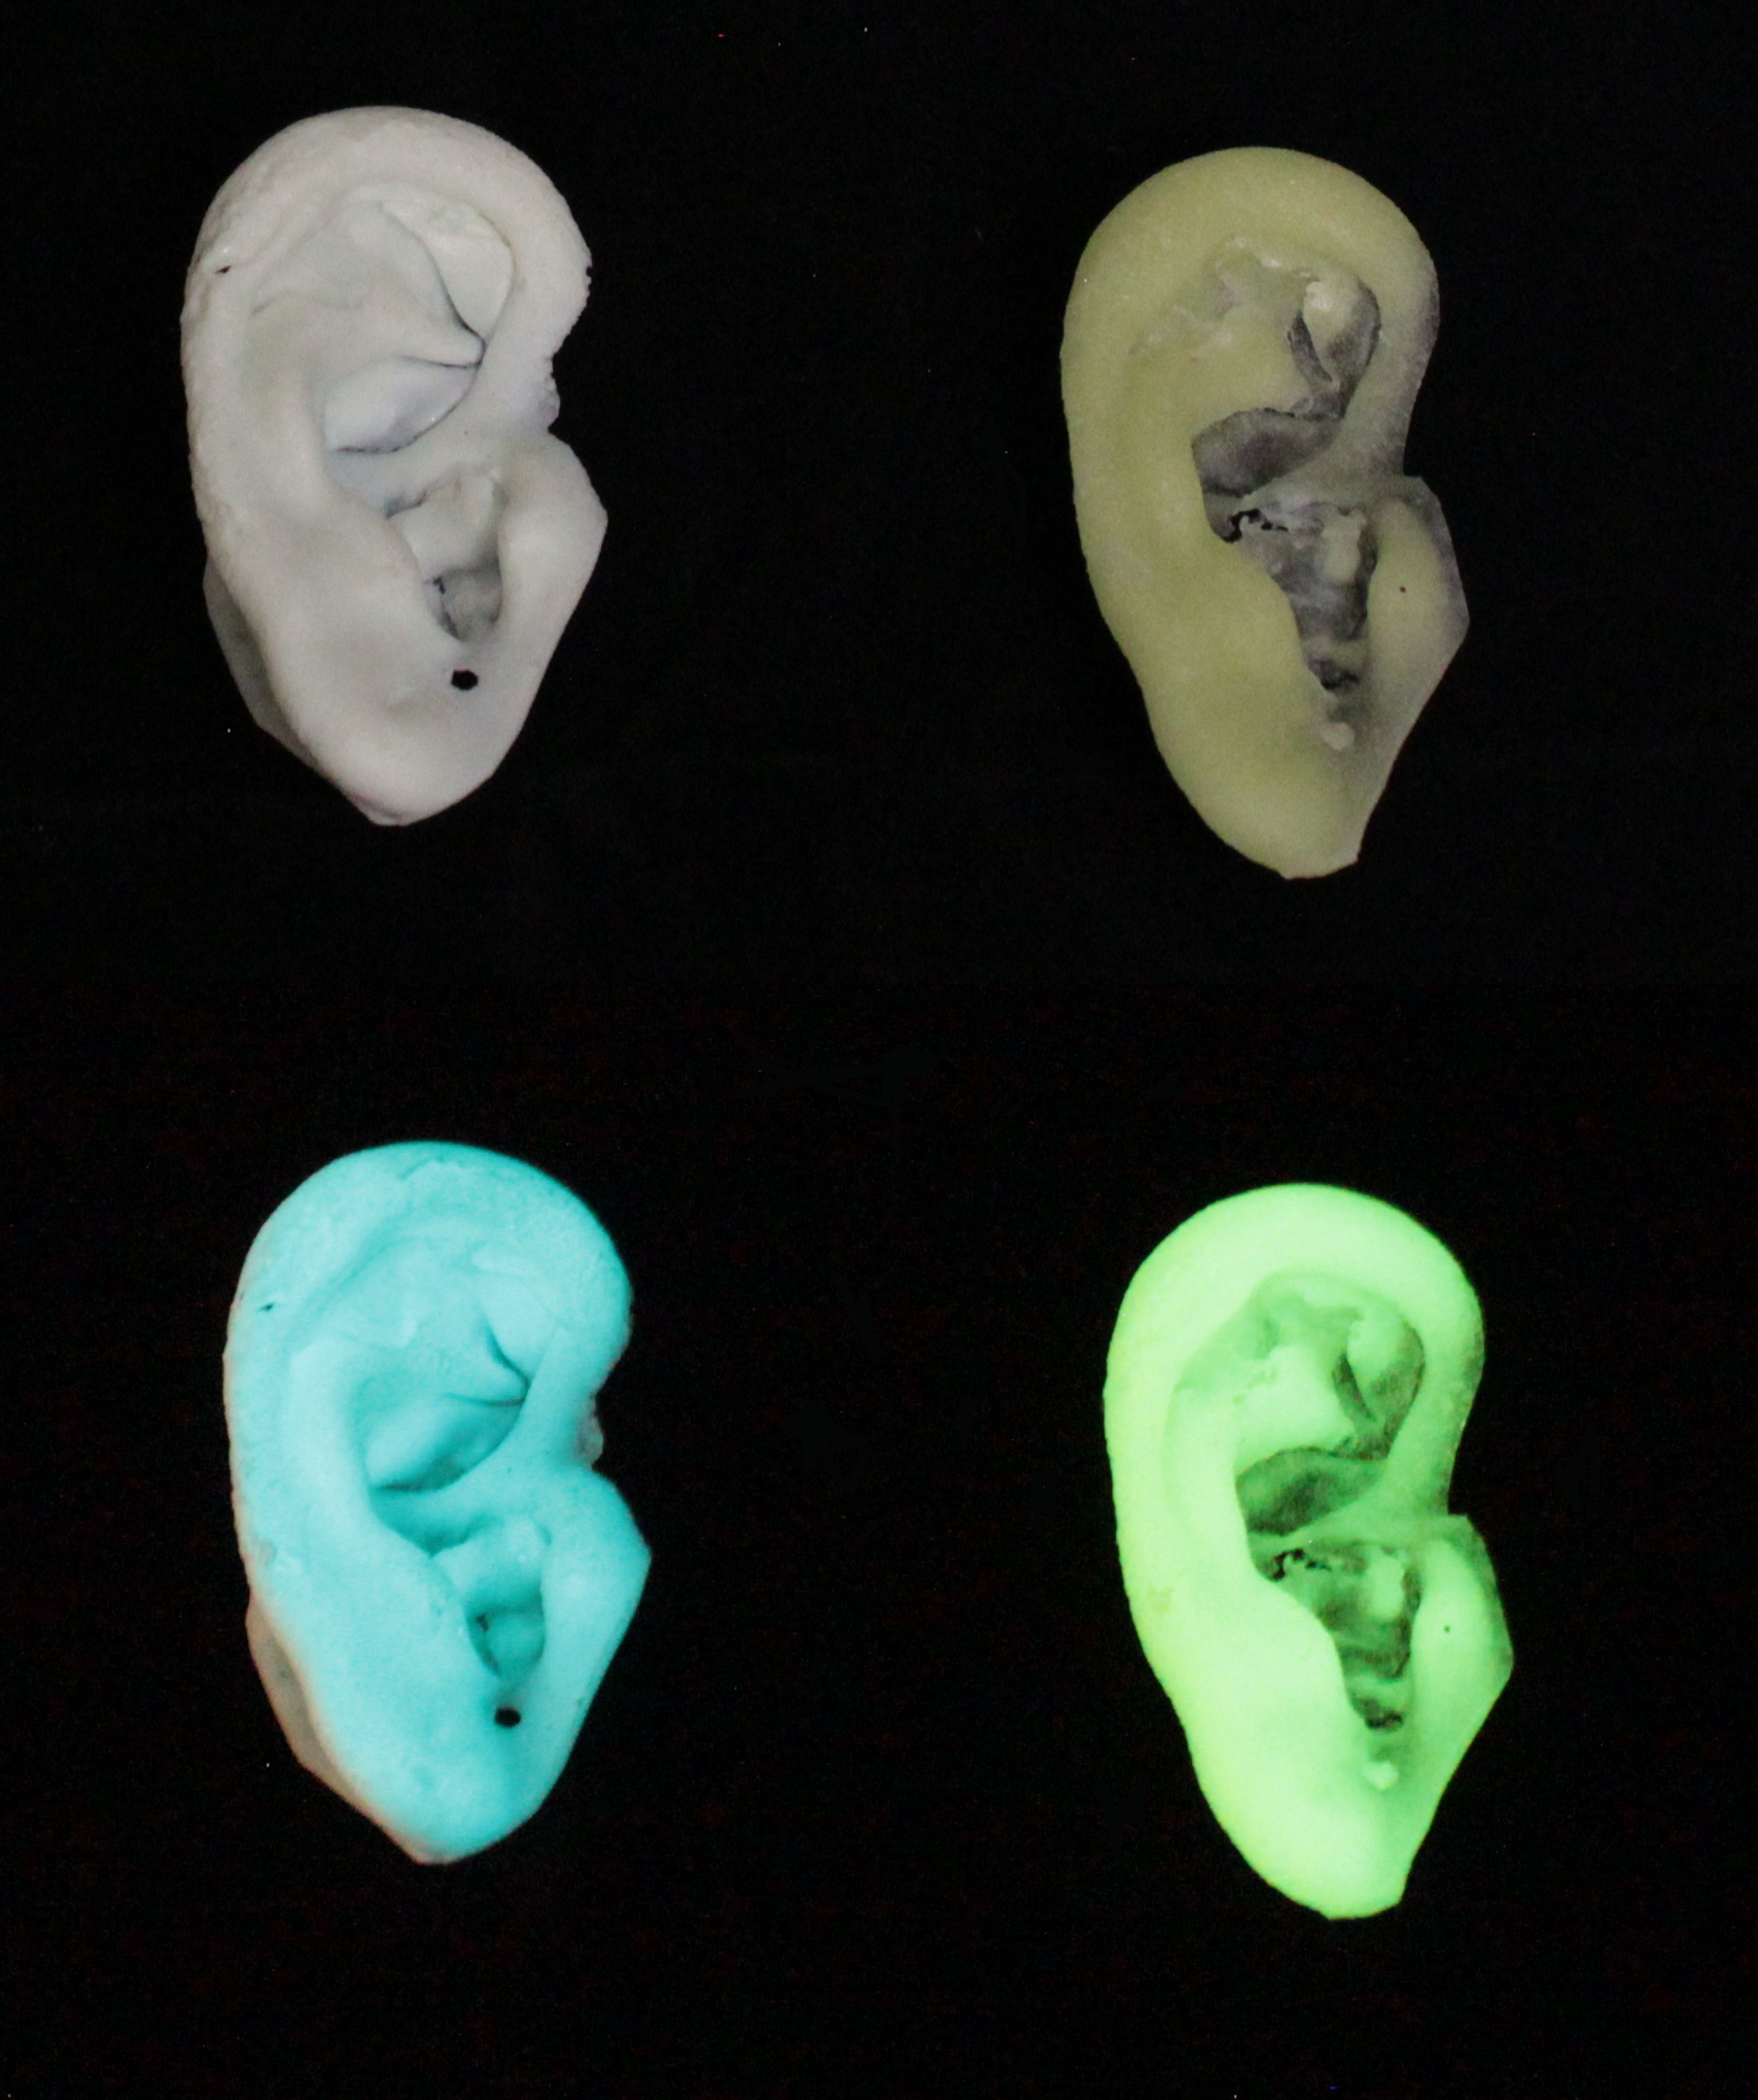 Two lifecast ears glowing in dark: green and blue.